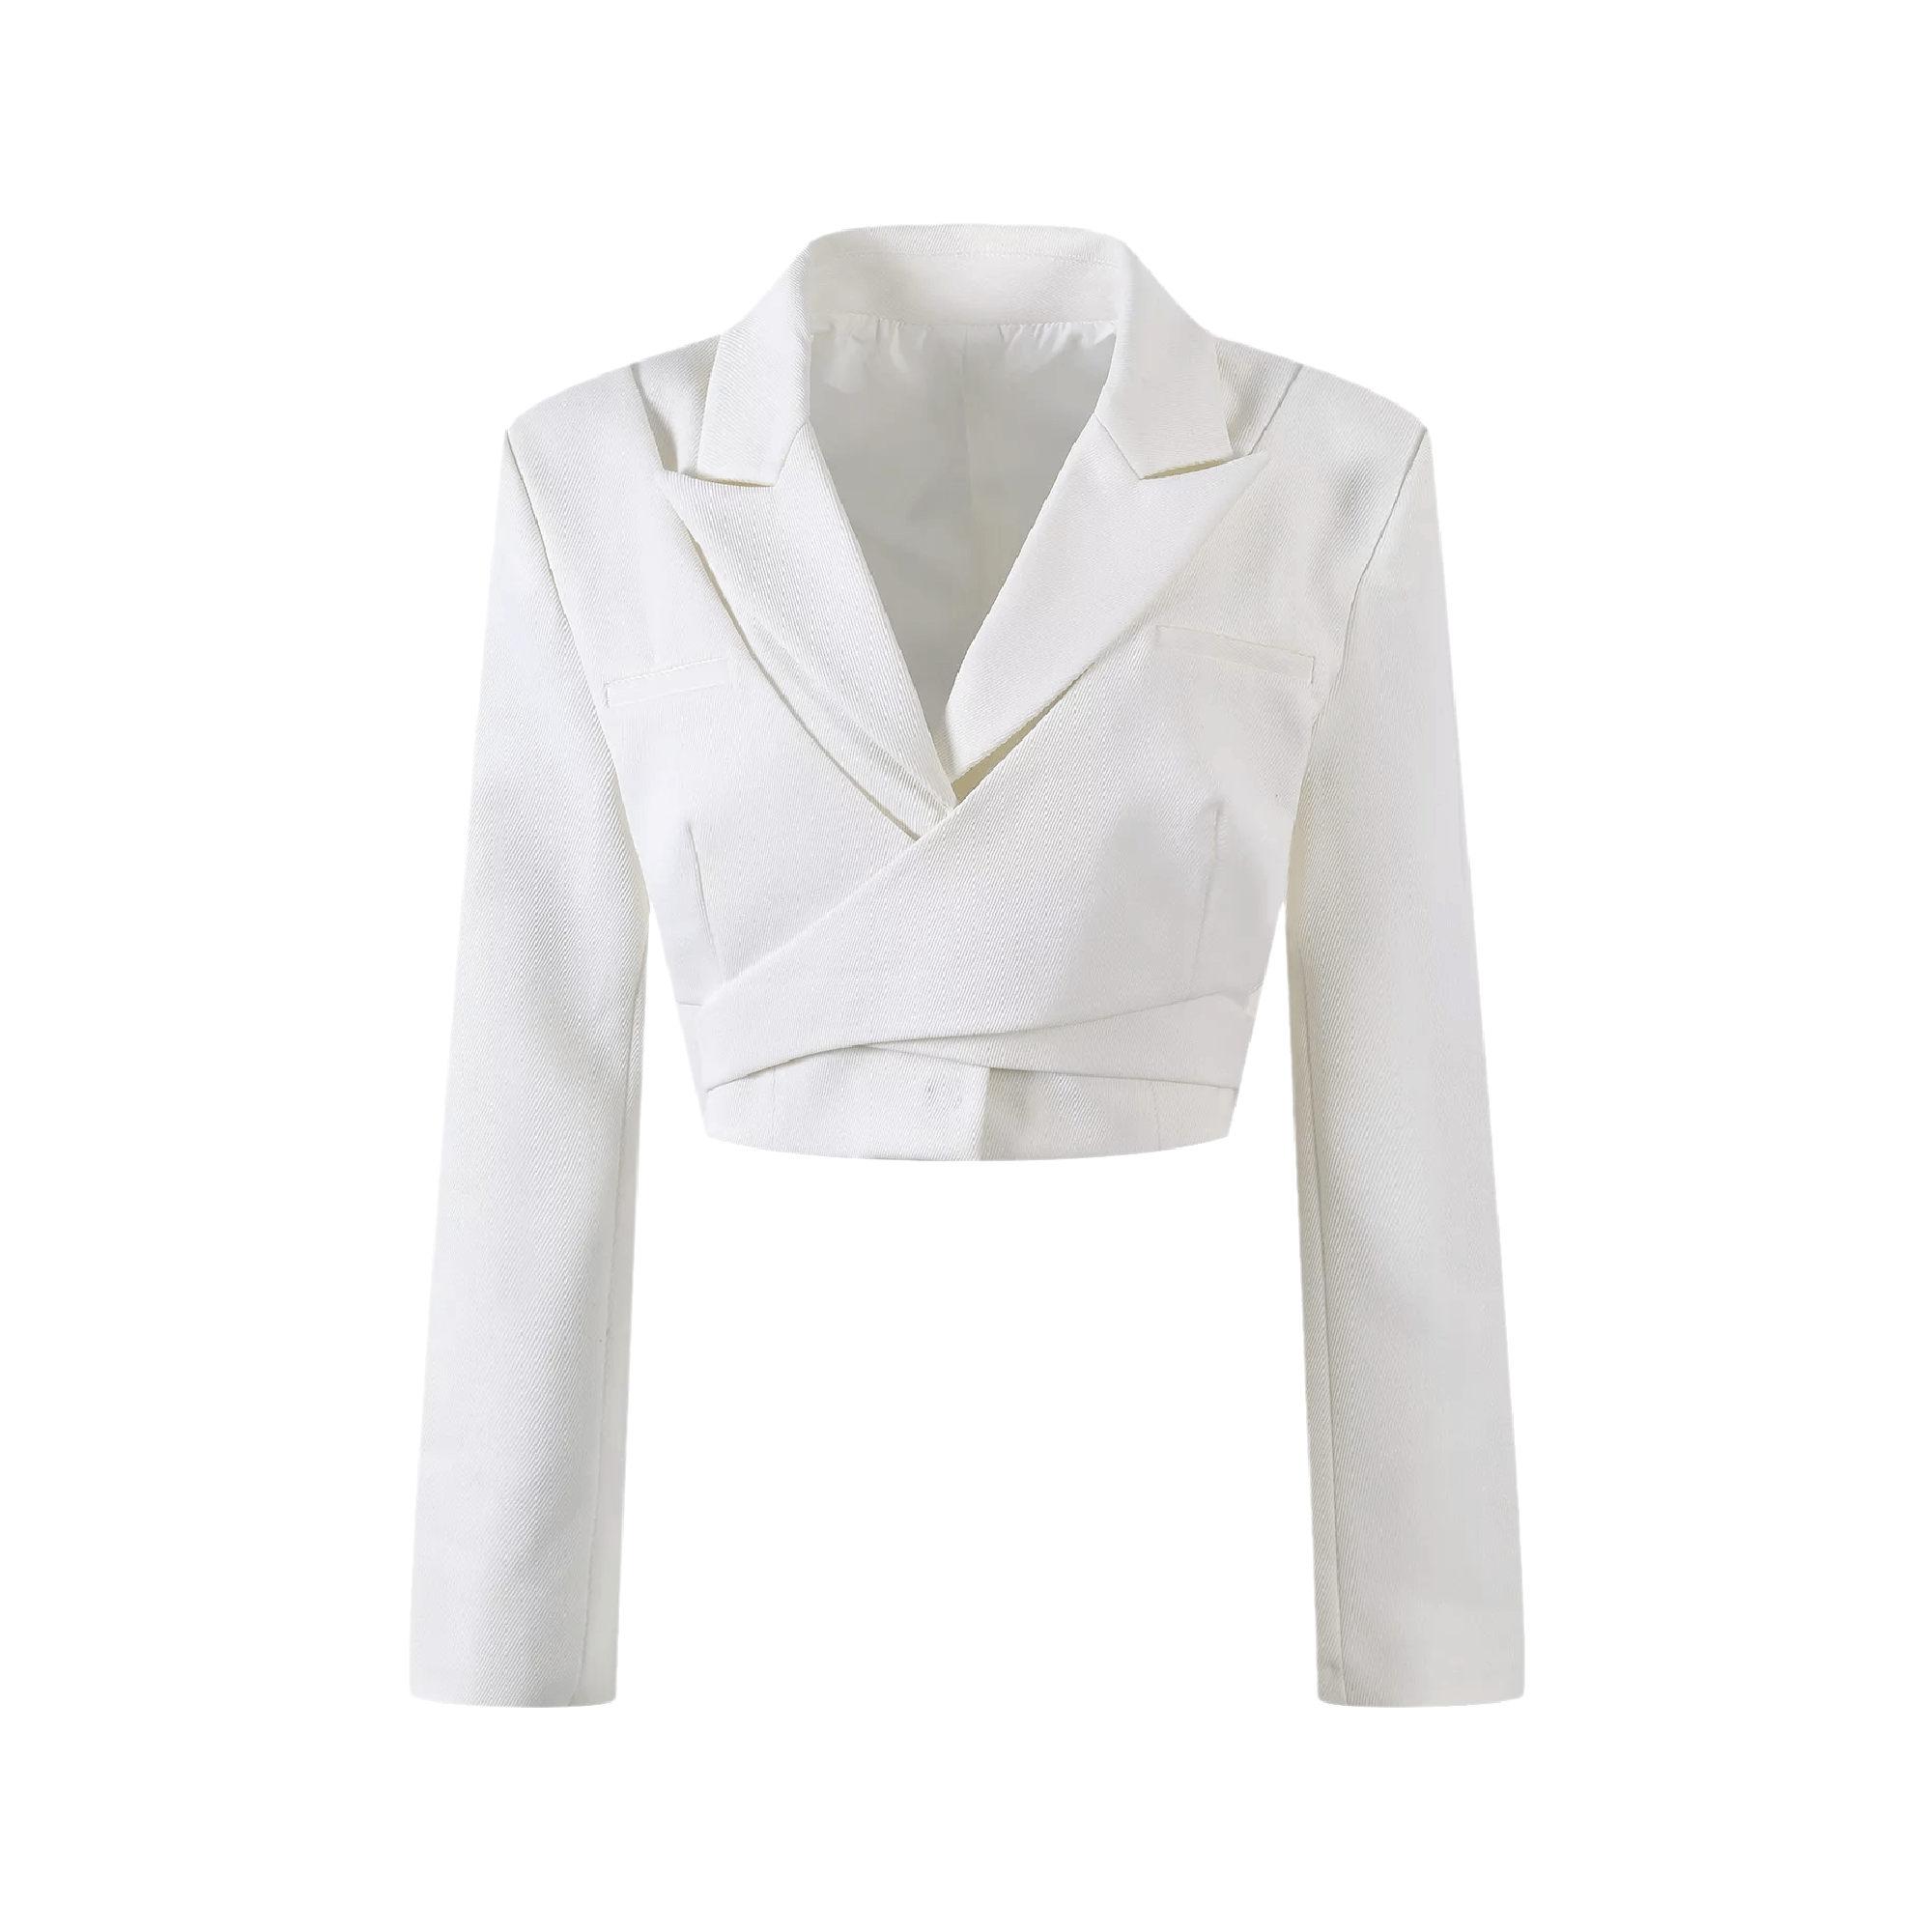 Notched lapel cropped jacket - itsy, it‘s different